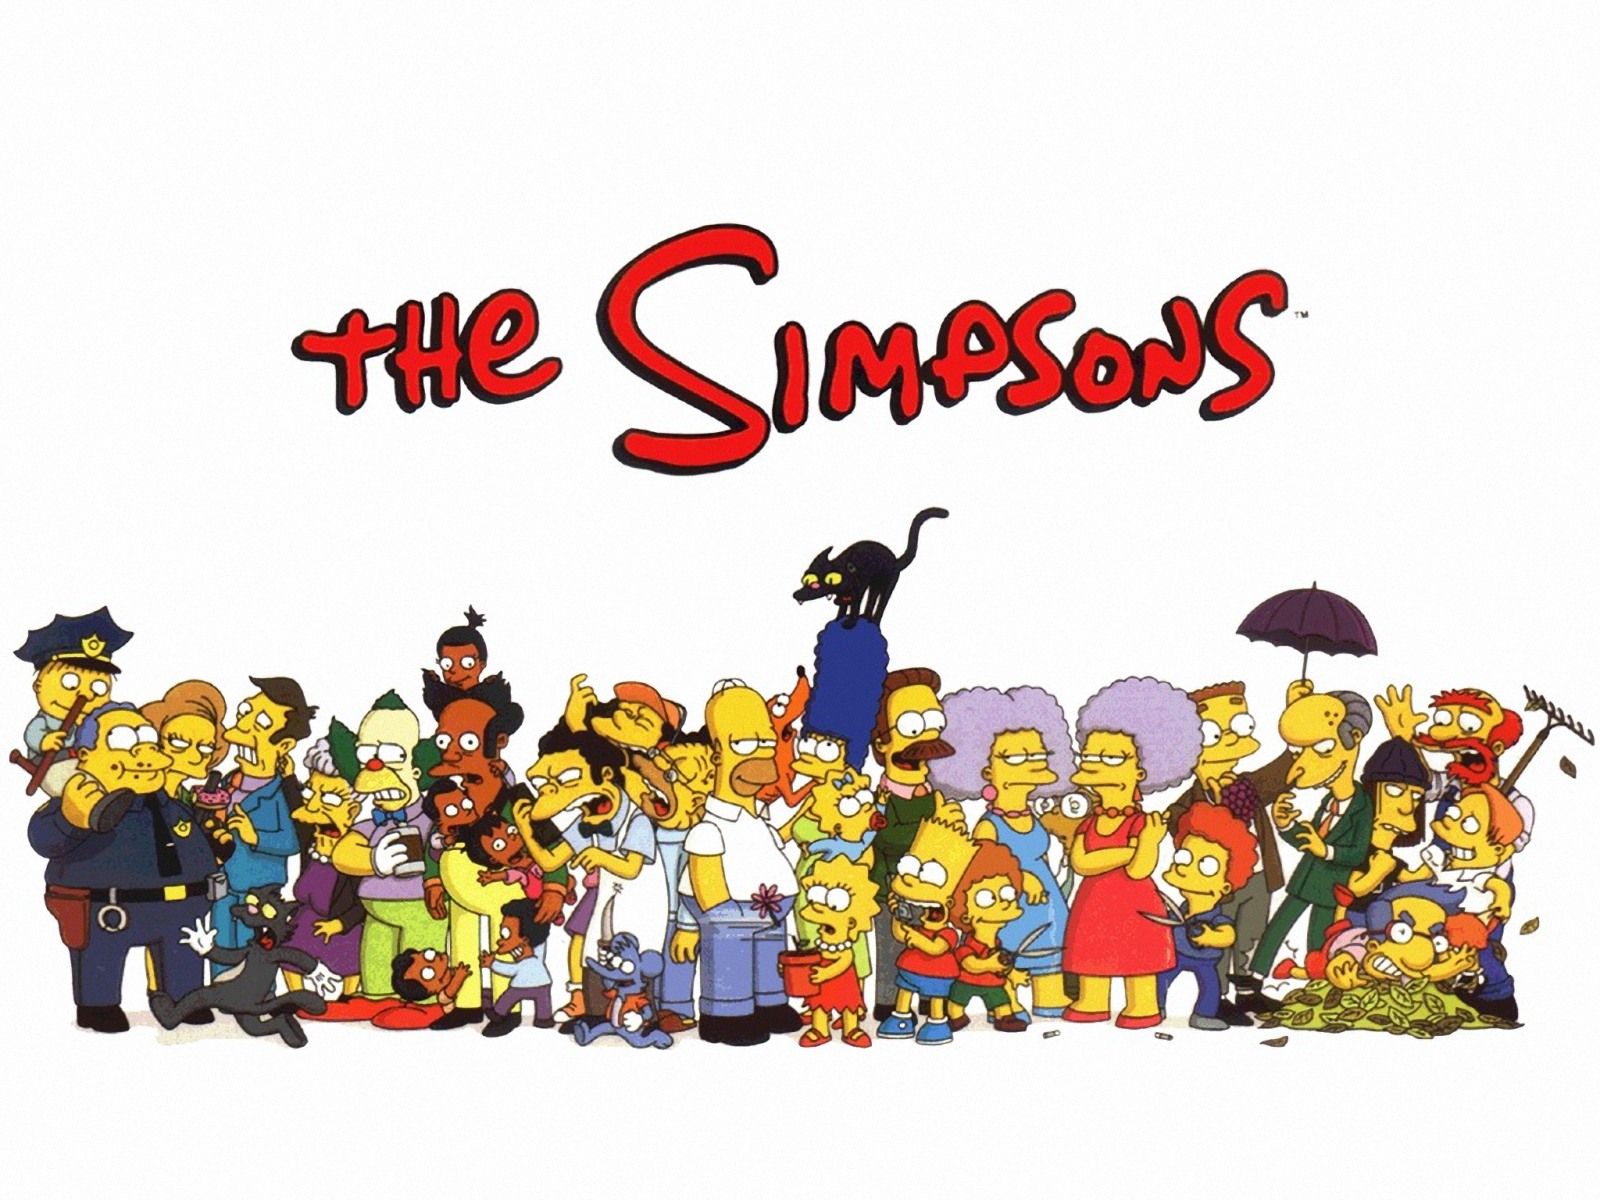 The Simpsons Wallpaper Hd - All The Simpsons , HD Wallpaper & Backgrounds